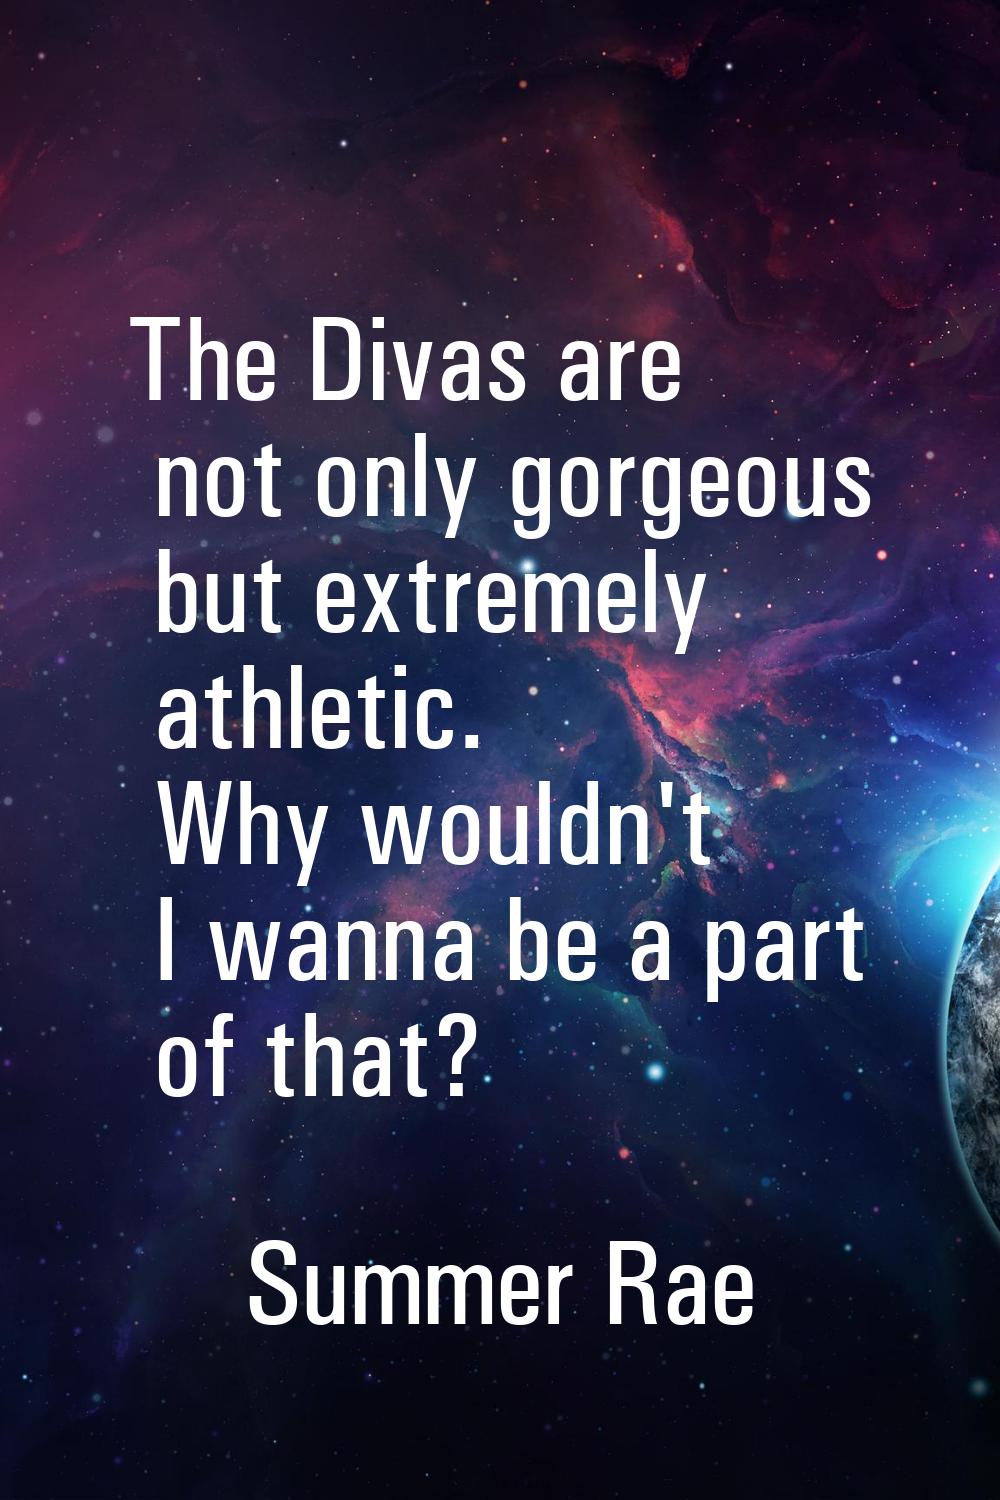 The Divas are not only gorgeous but extremely athletic. Why wouldn't I wanna be a part of that?